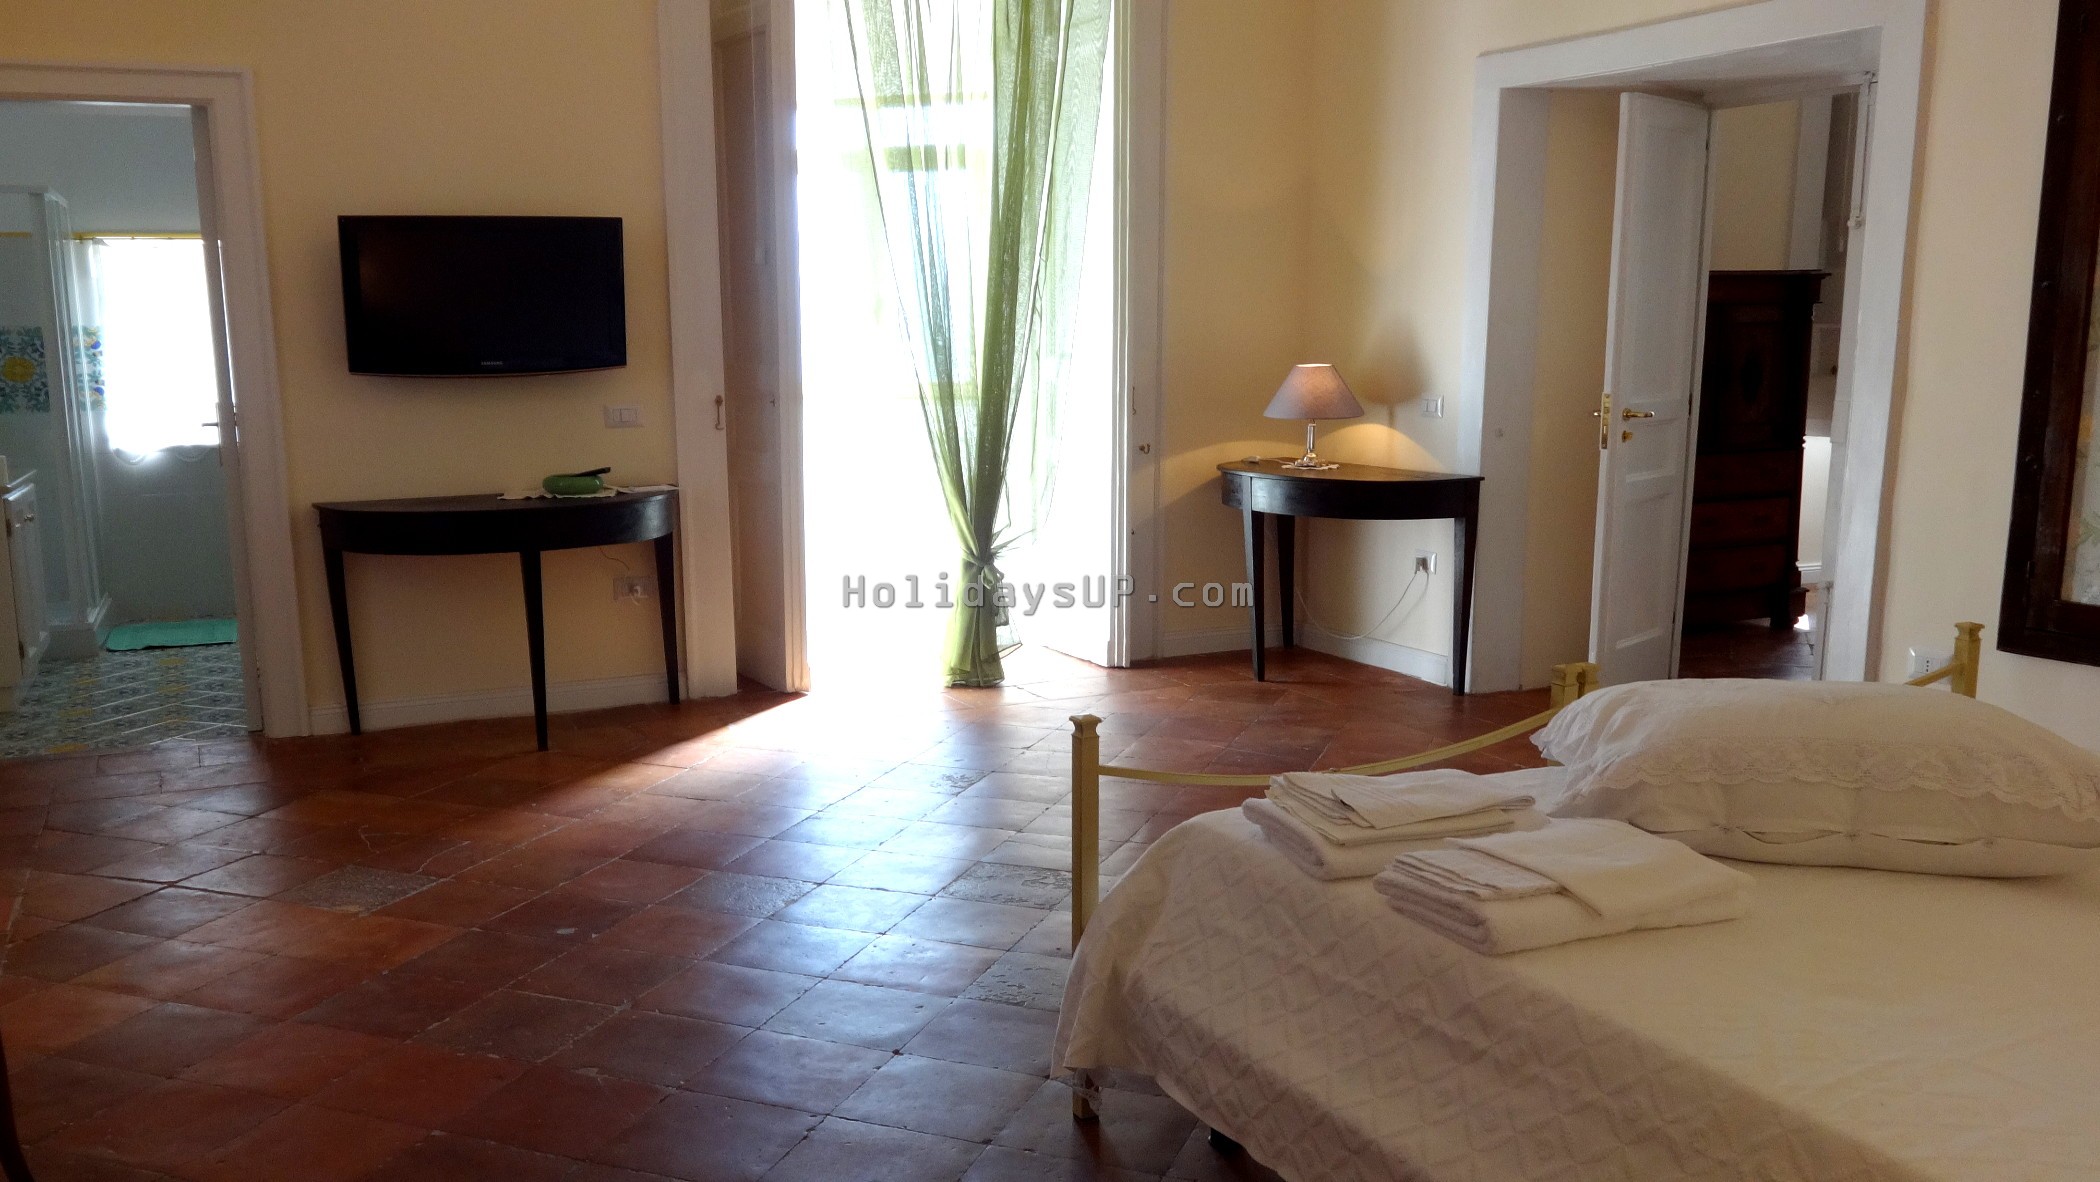 Double large bedroom at Villa Barone located close to Sorrento